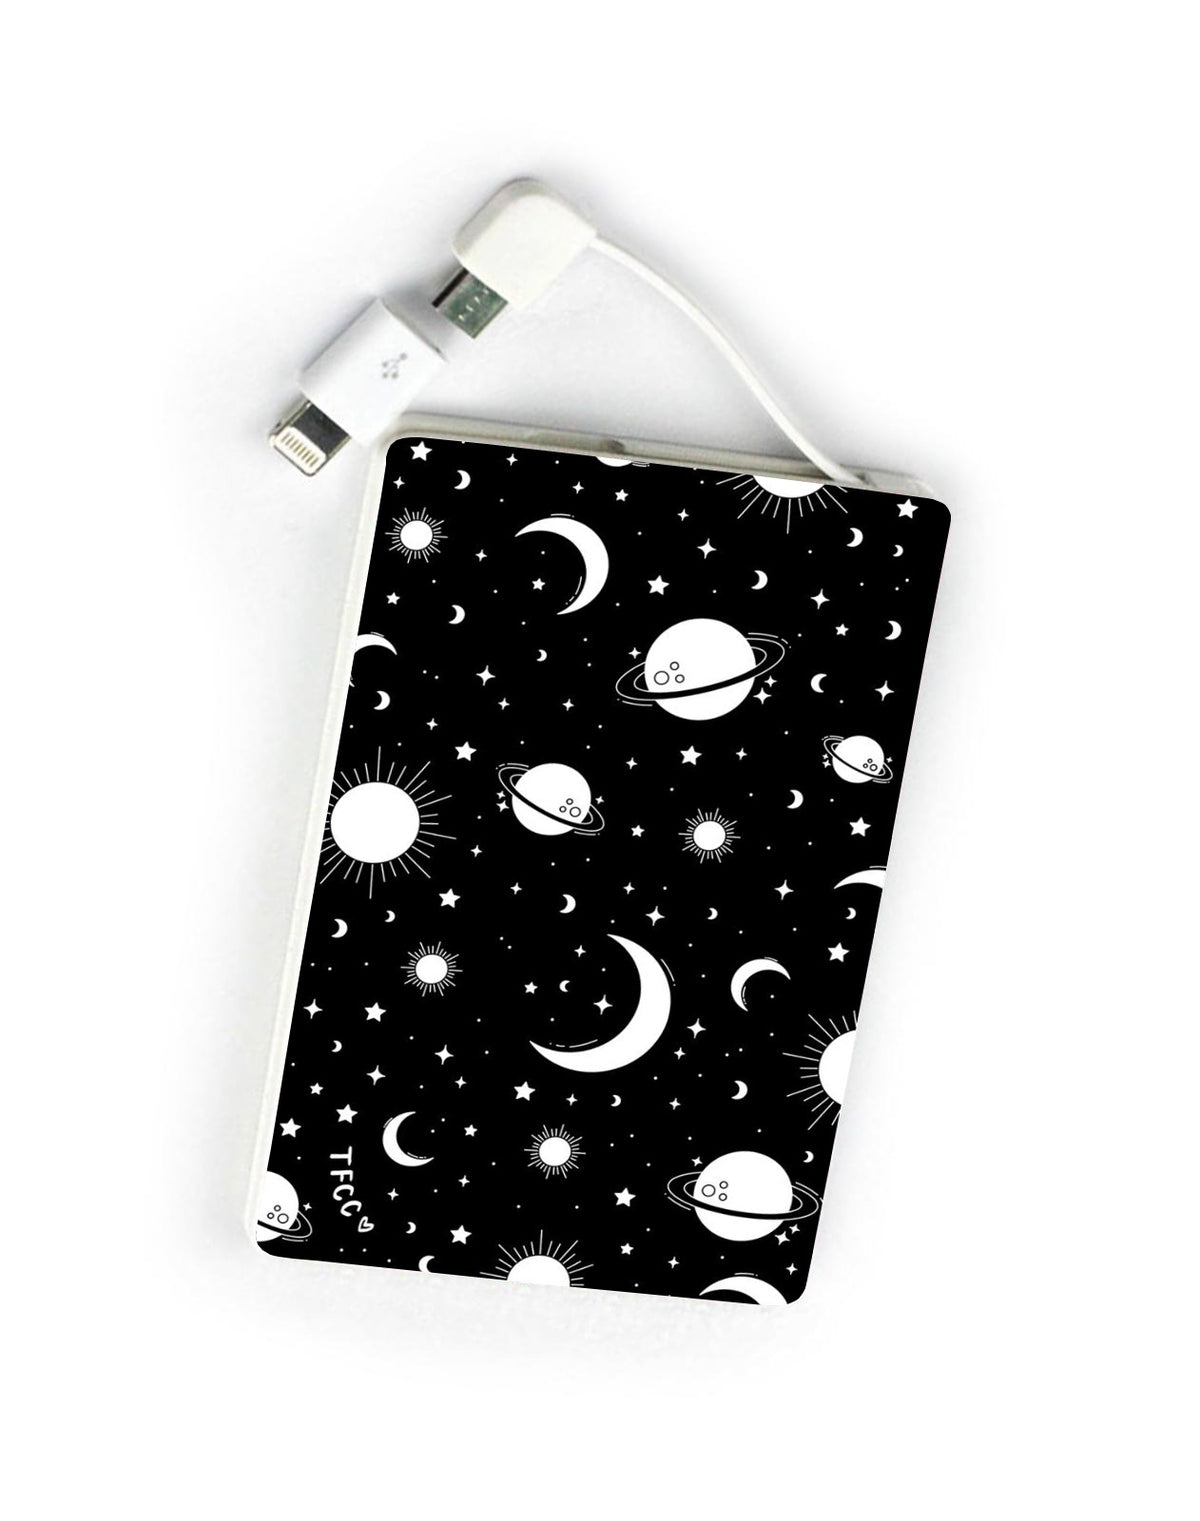 Stars and moons celestial Power Bank - thefonecasecompany